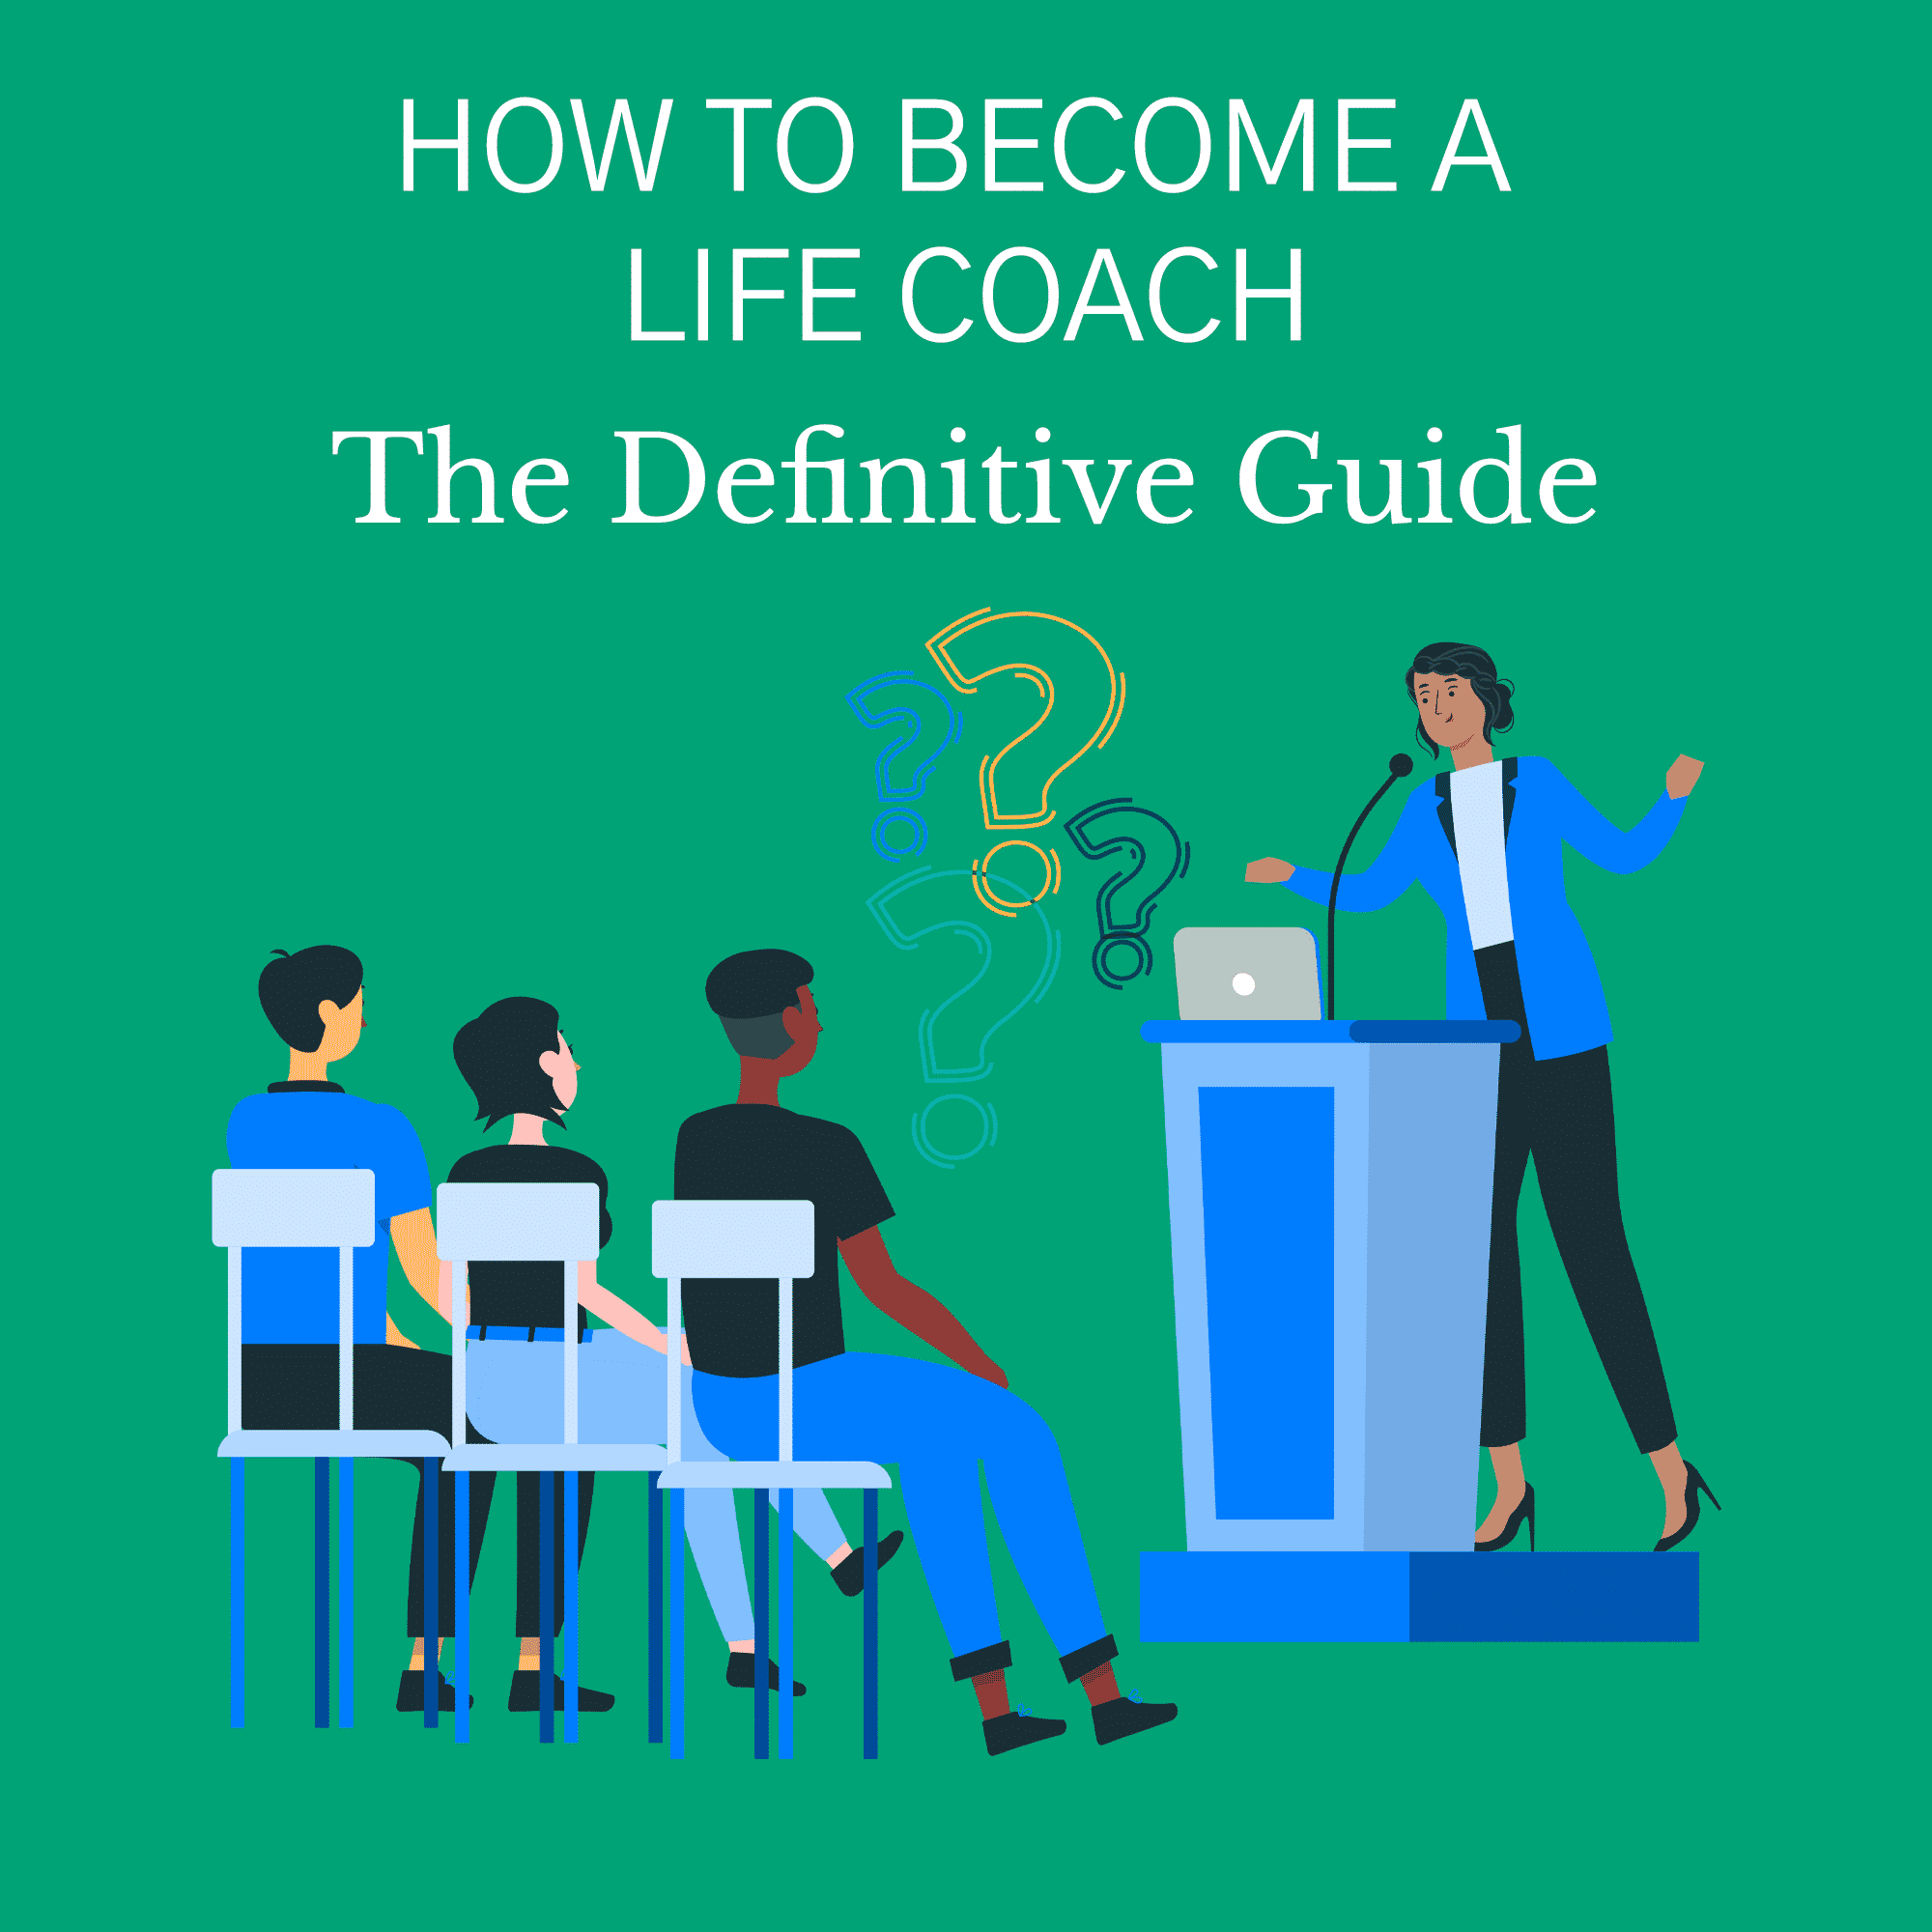 How To Become a Life Coach: The Ultimate Guide